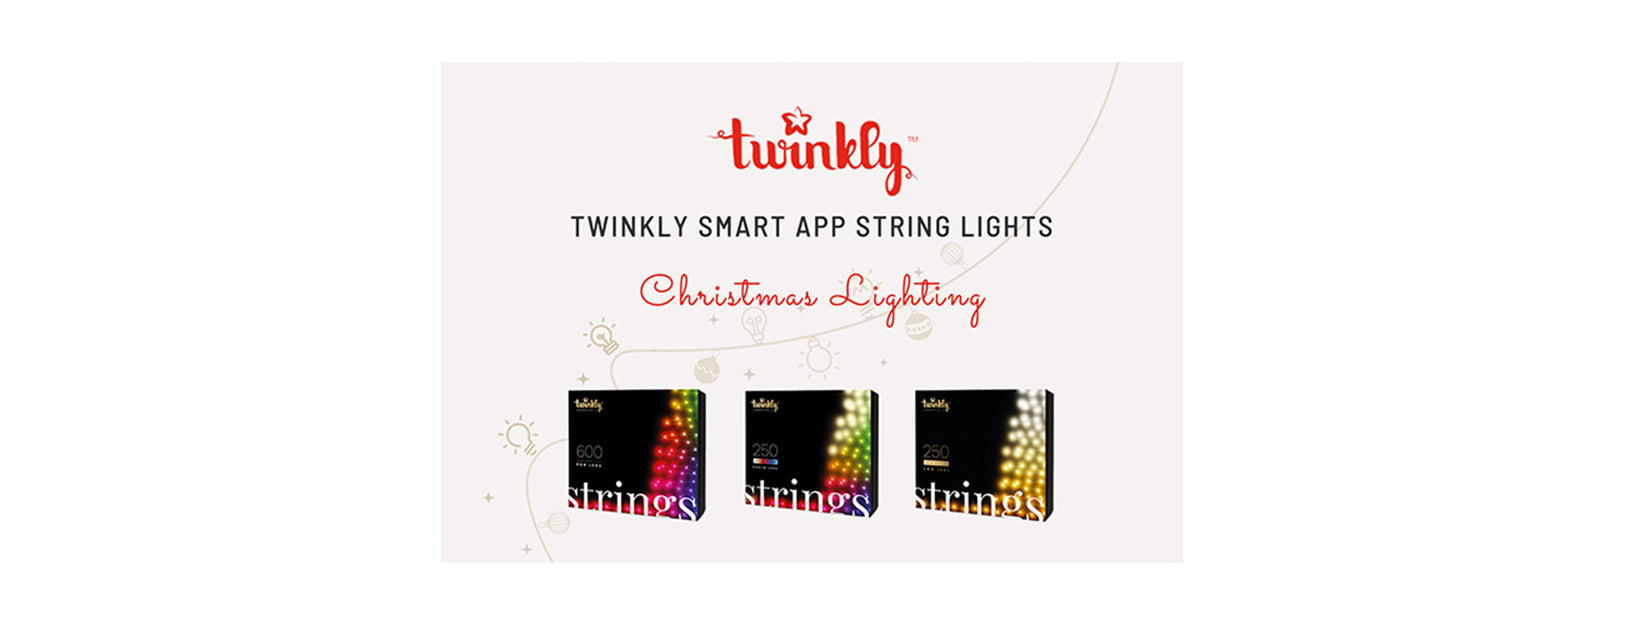 Have You Heard About Twinkly Smart App Lights?